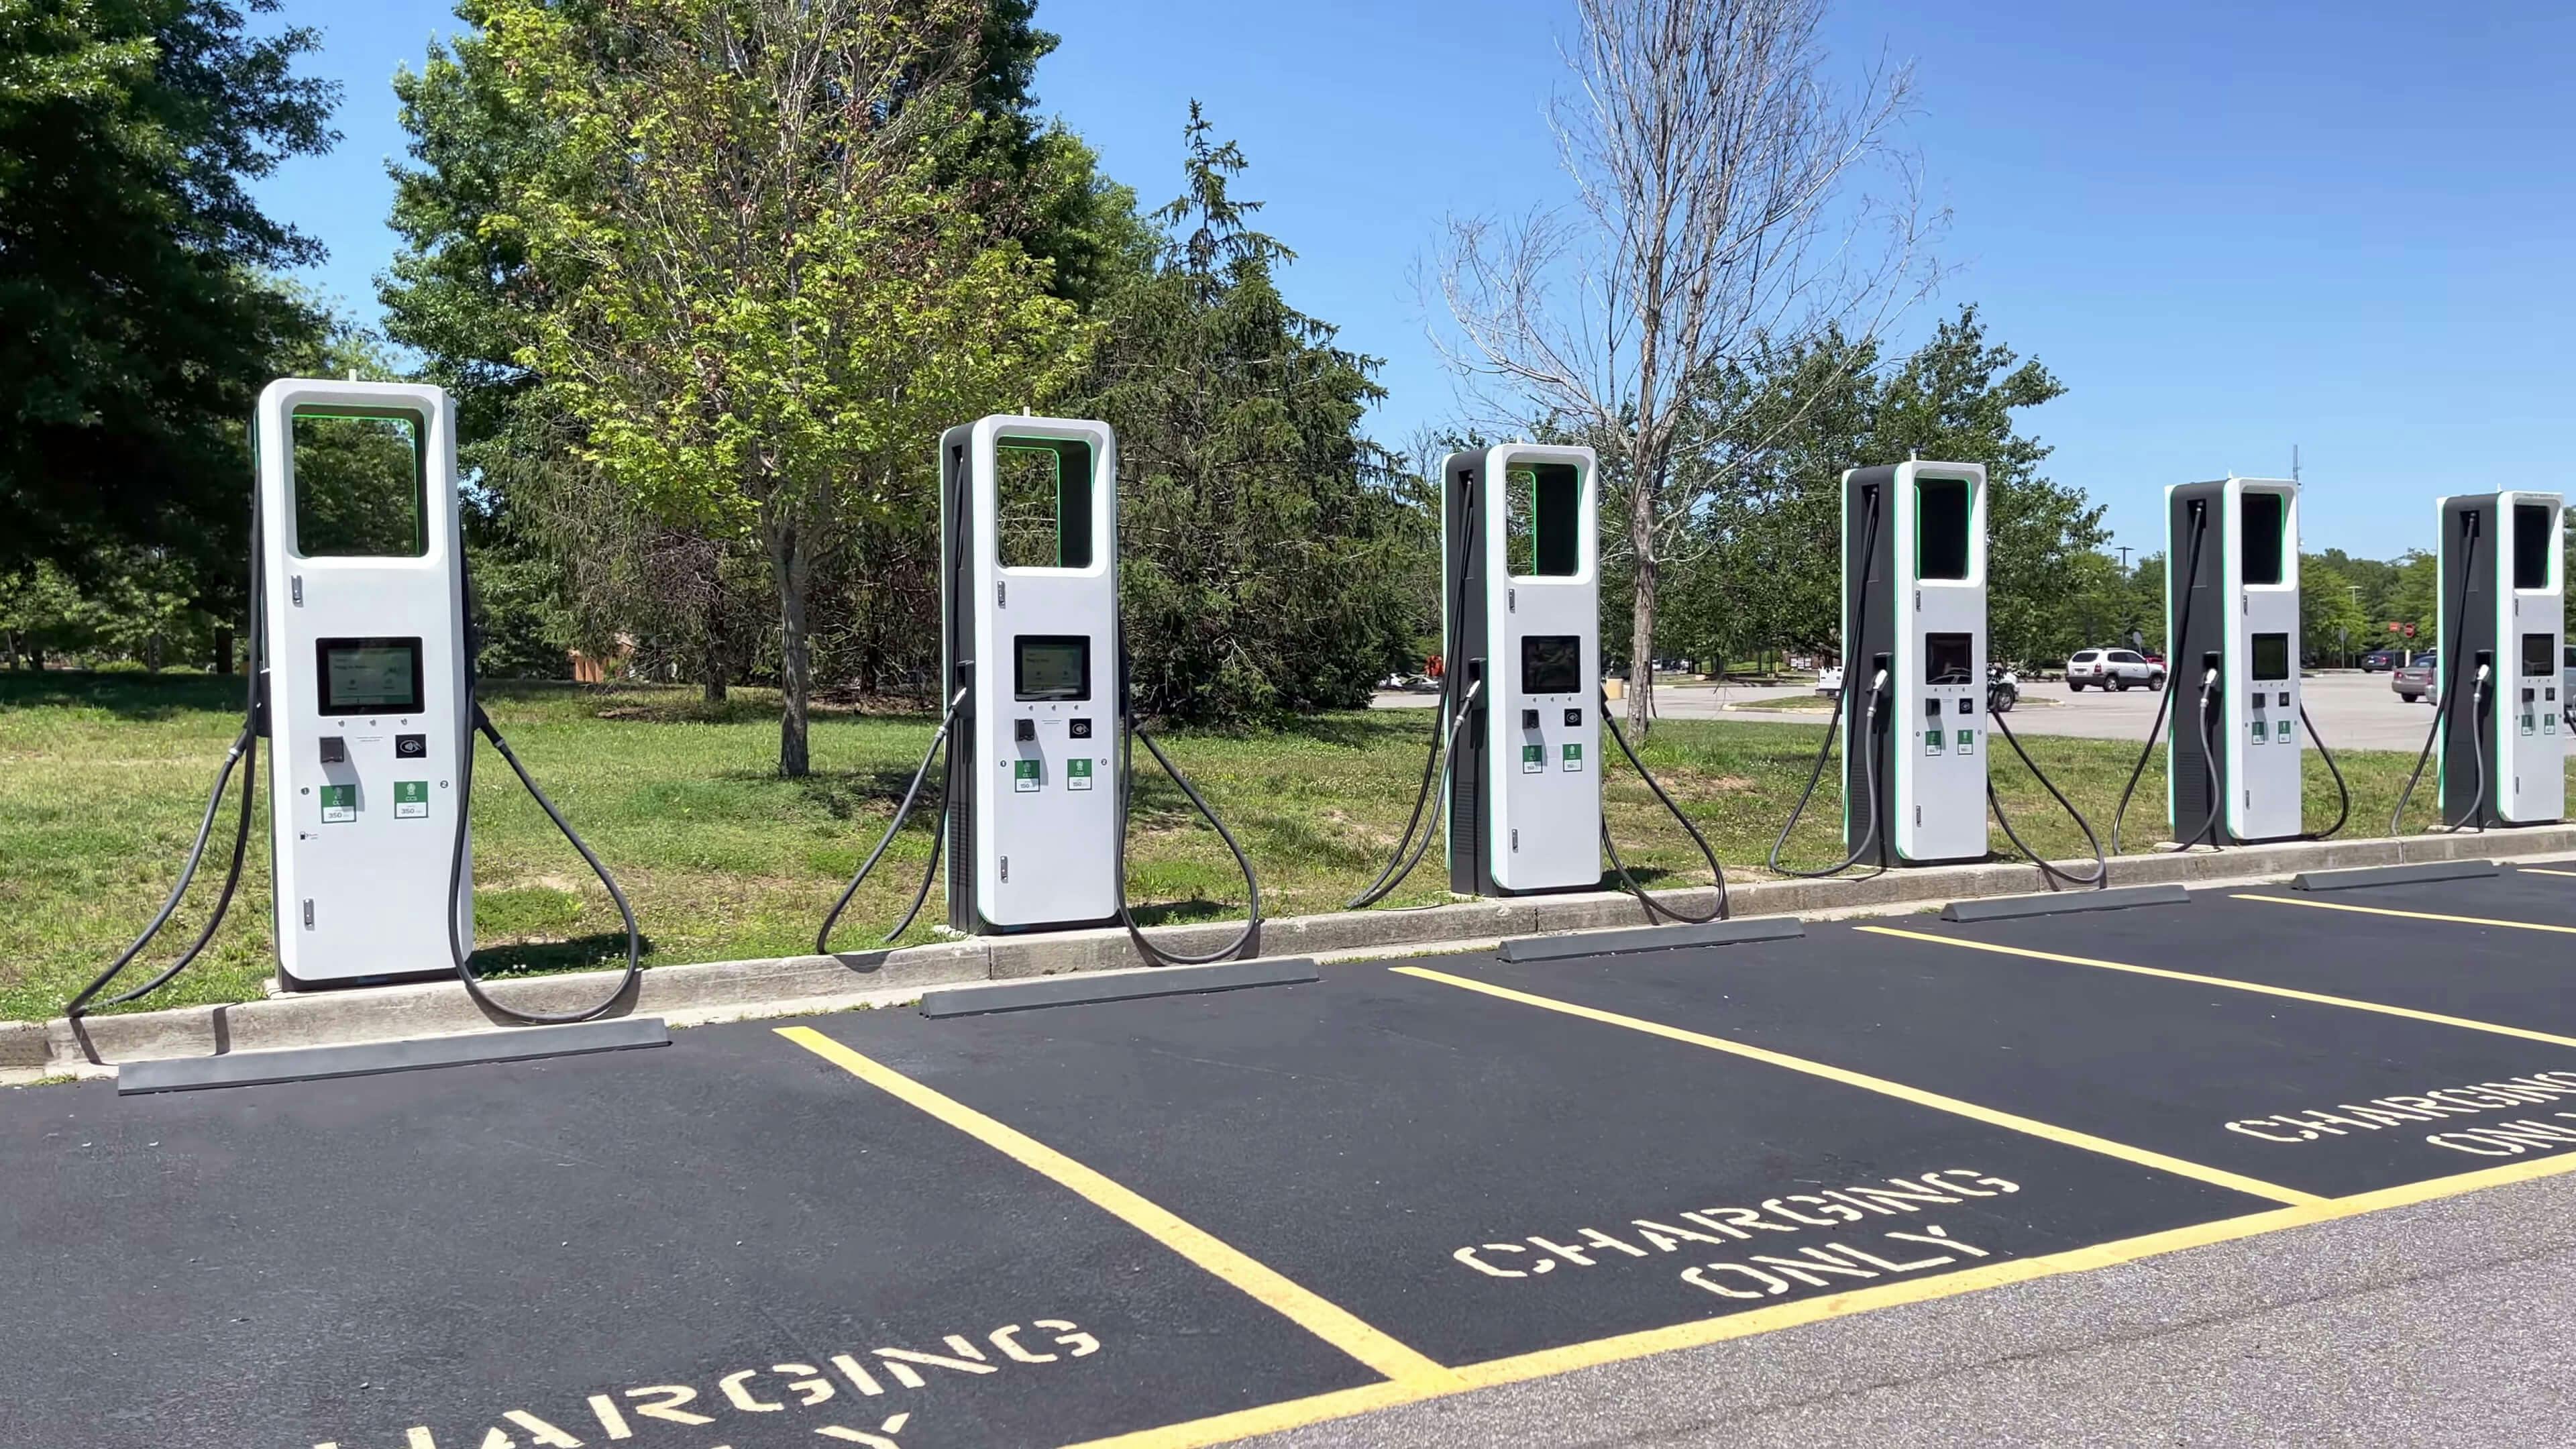 6 white EV chargers in a parking slot 